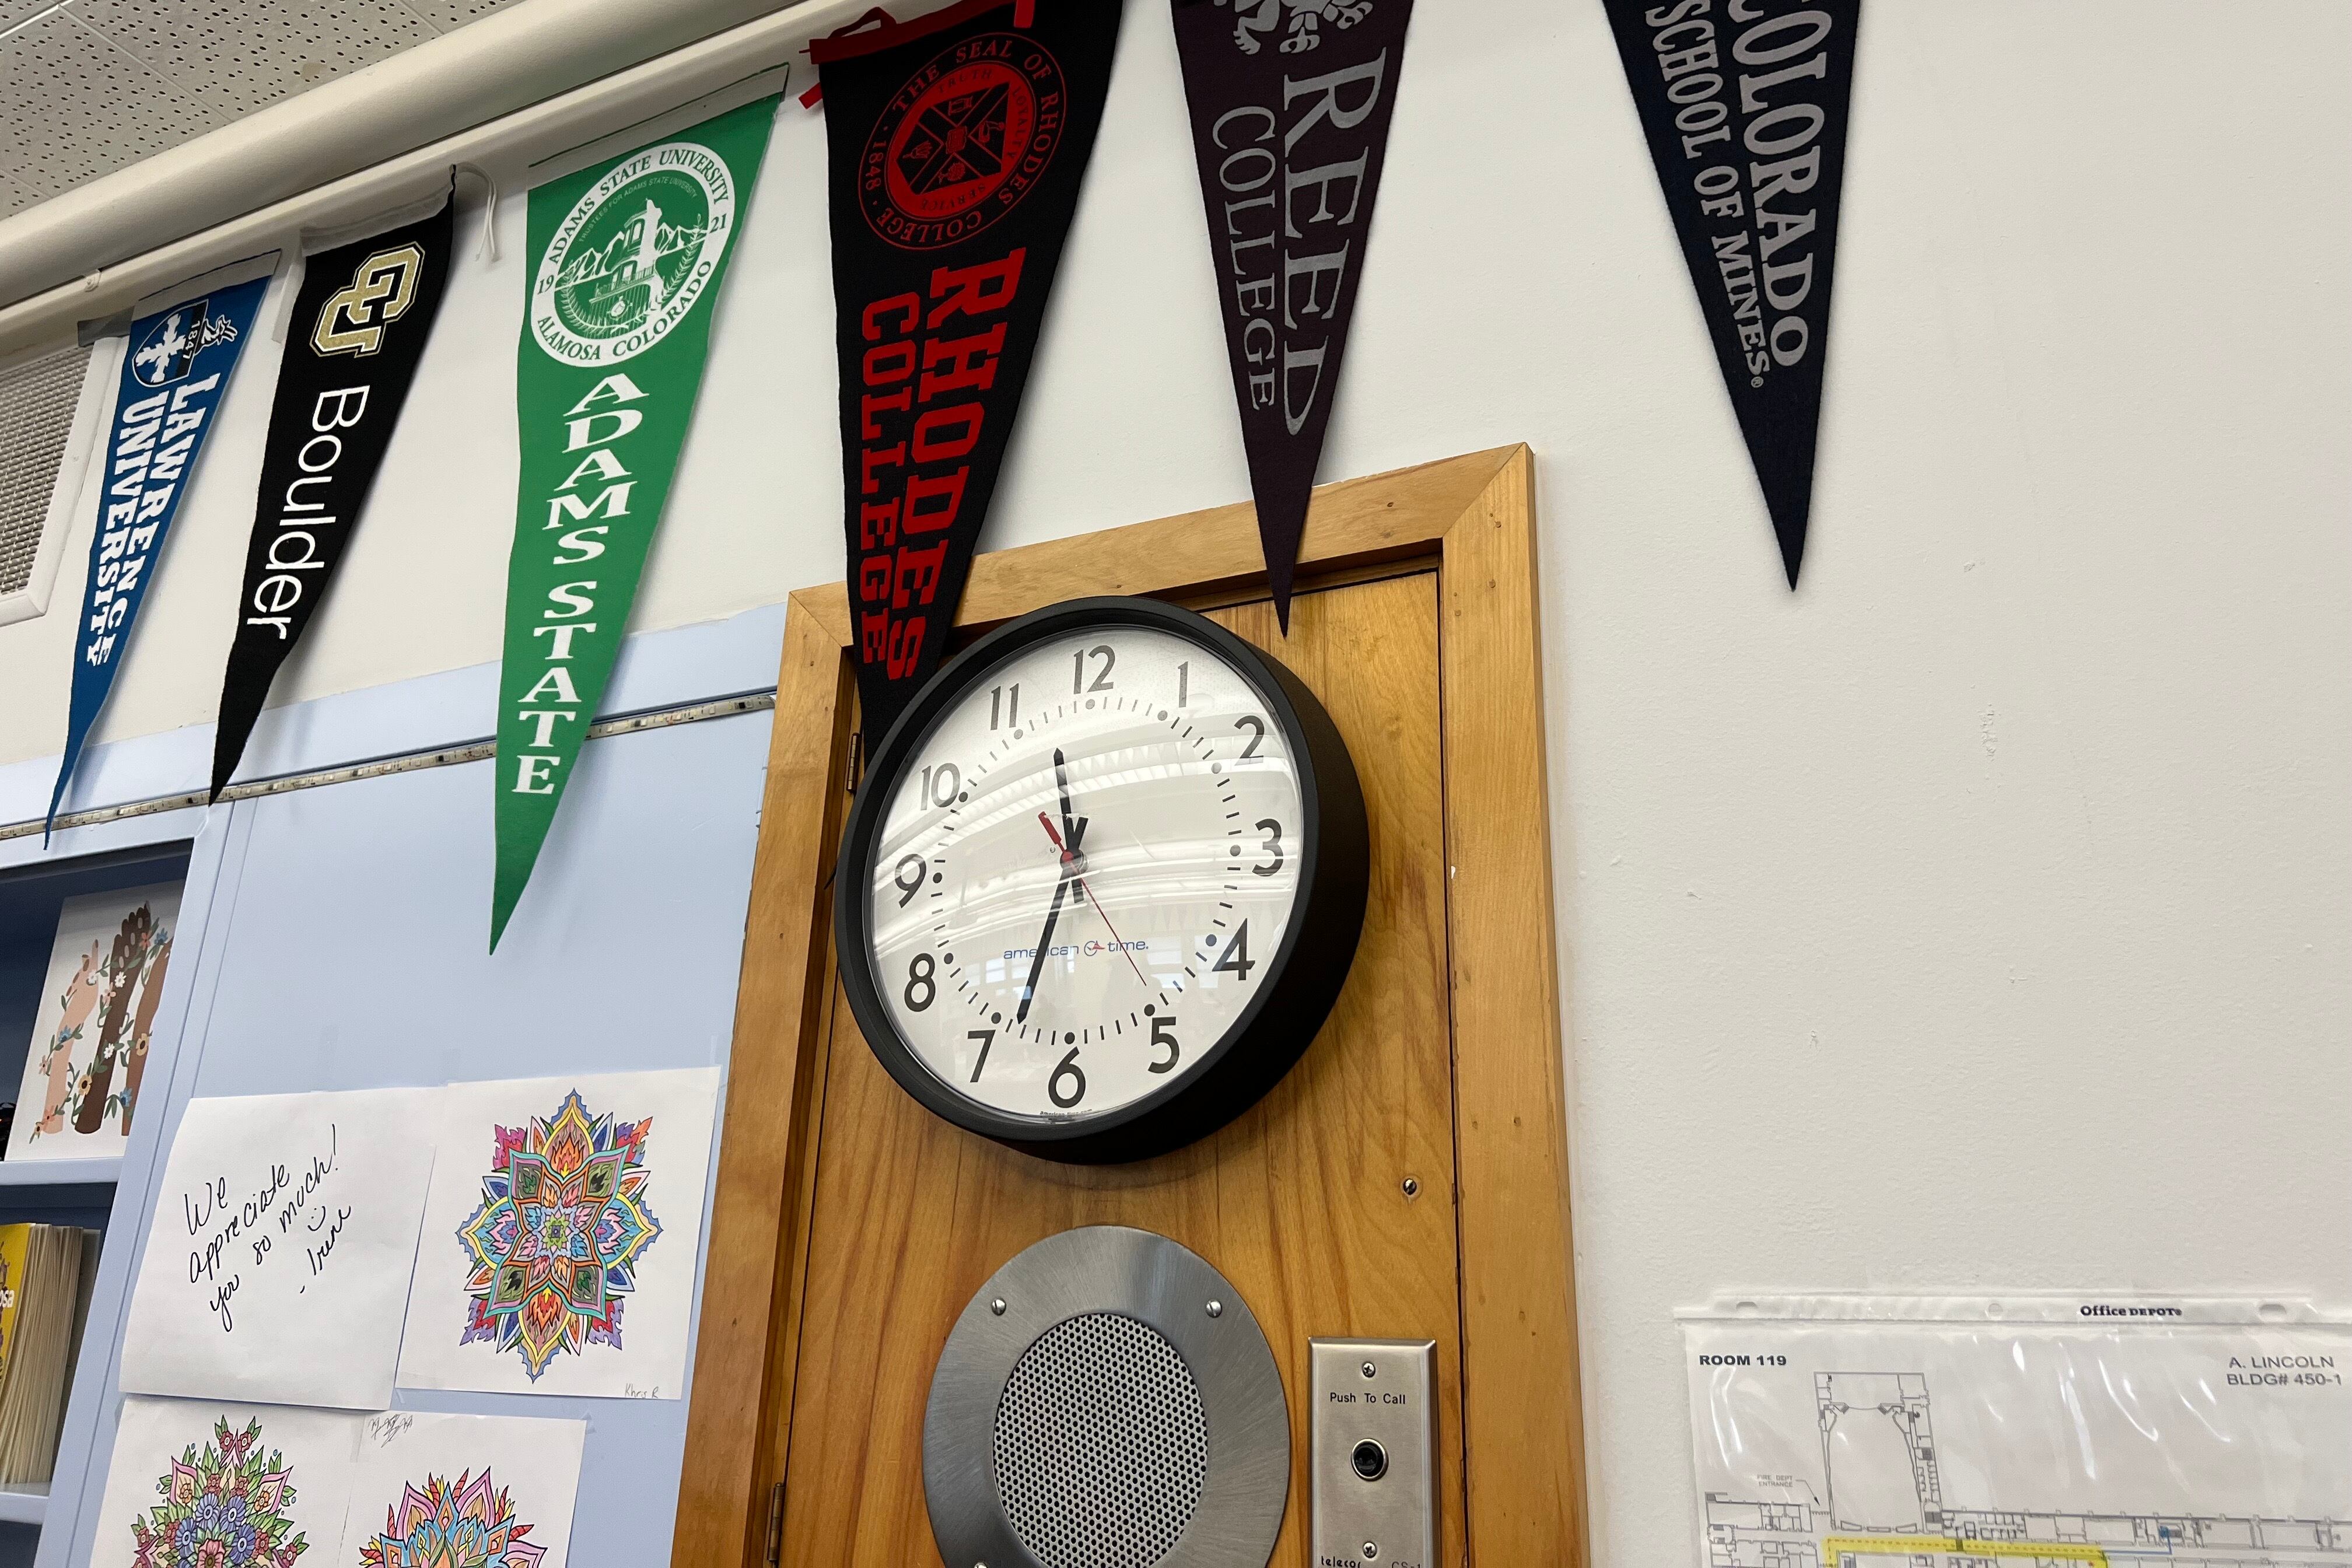 College pennant flags hang inside Lincoln High School in Denver above a clock.